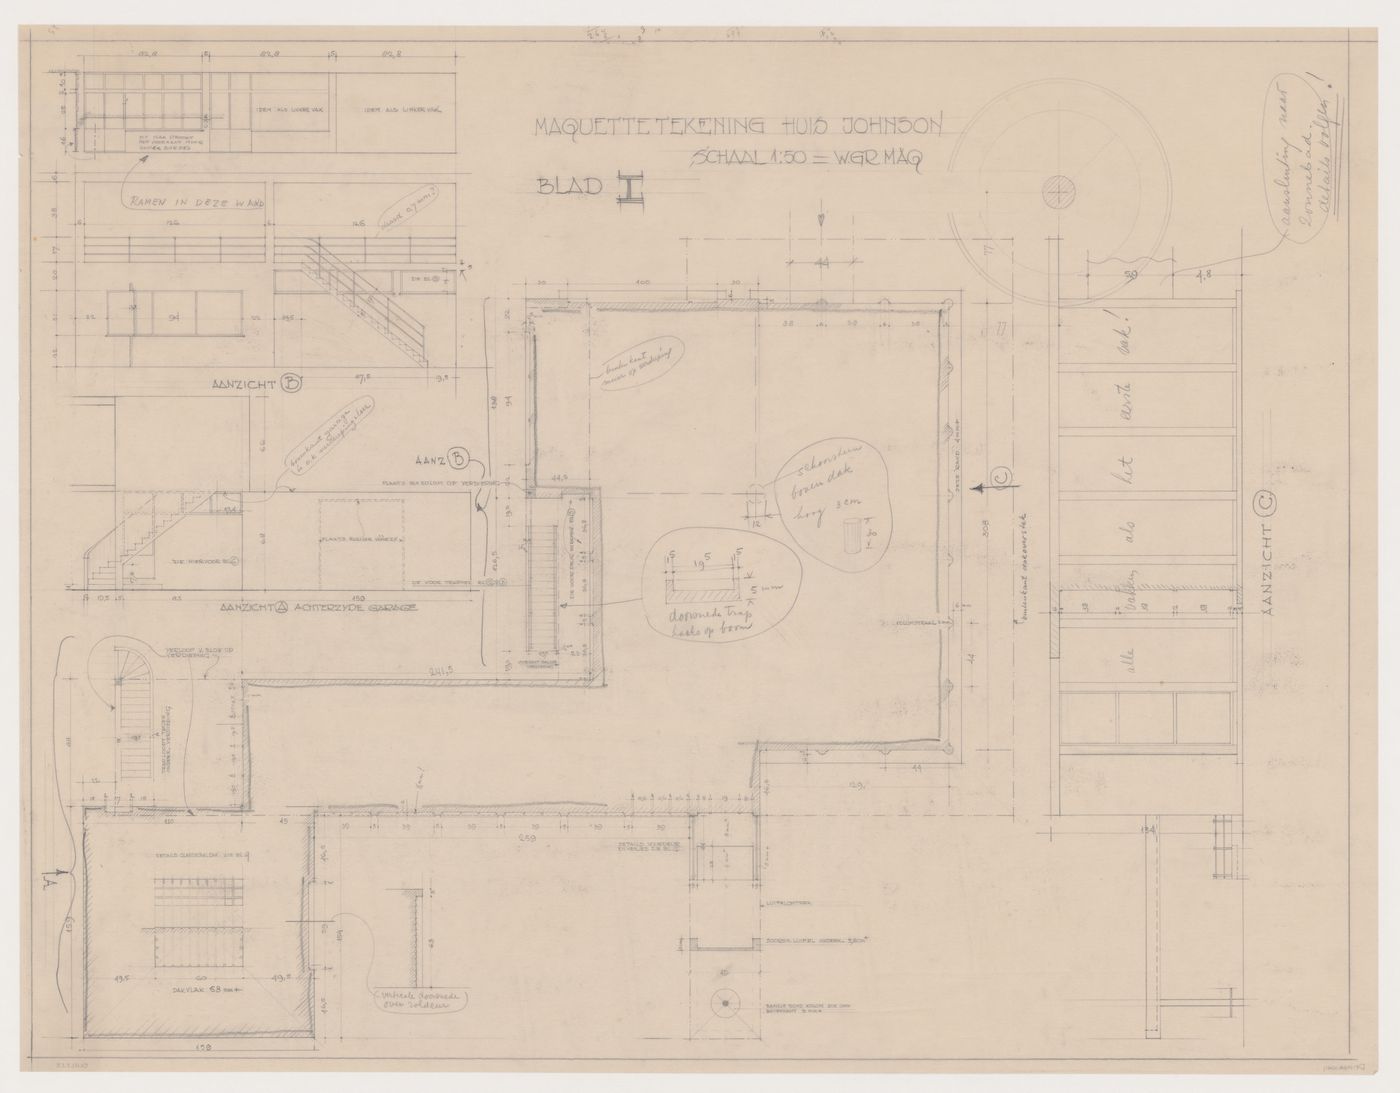 Plan, sections and elevations for a model for Johnson House, Pinehurst, North Carolina